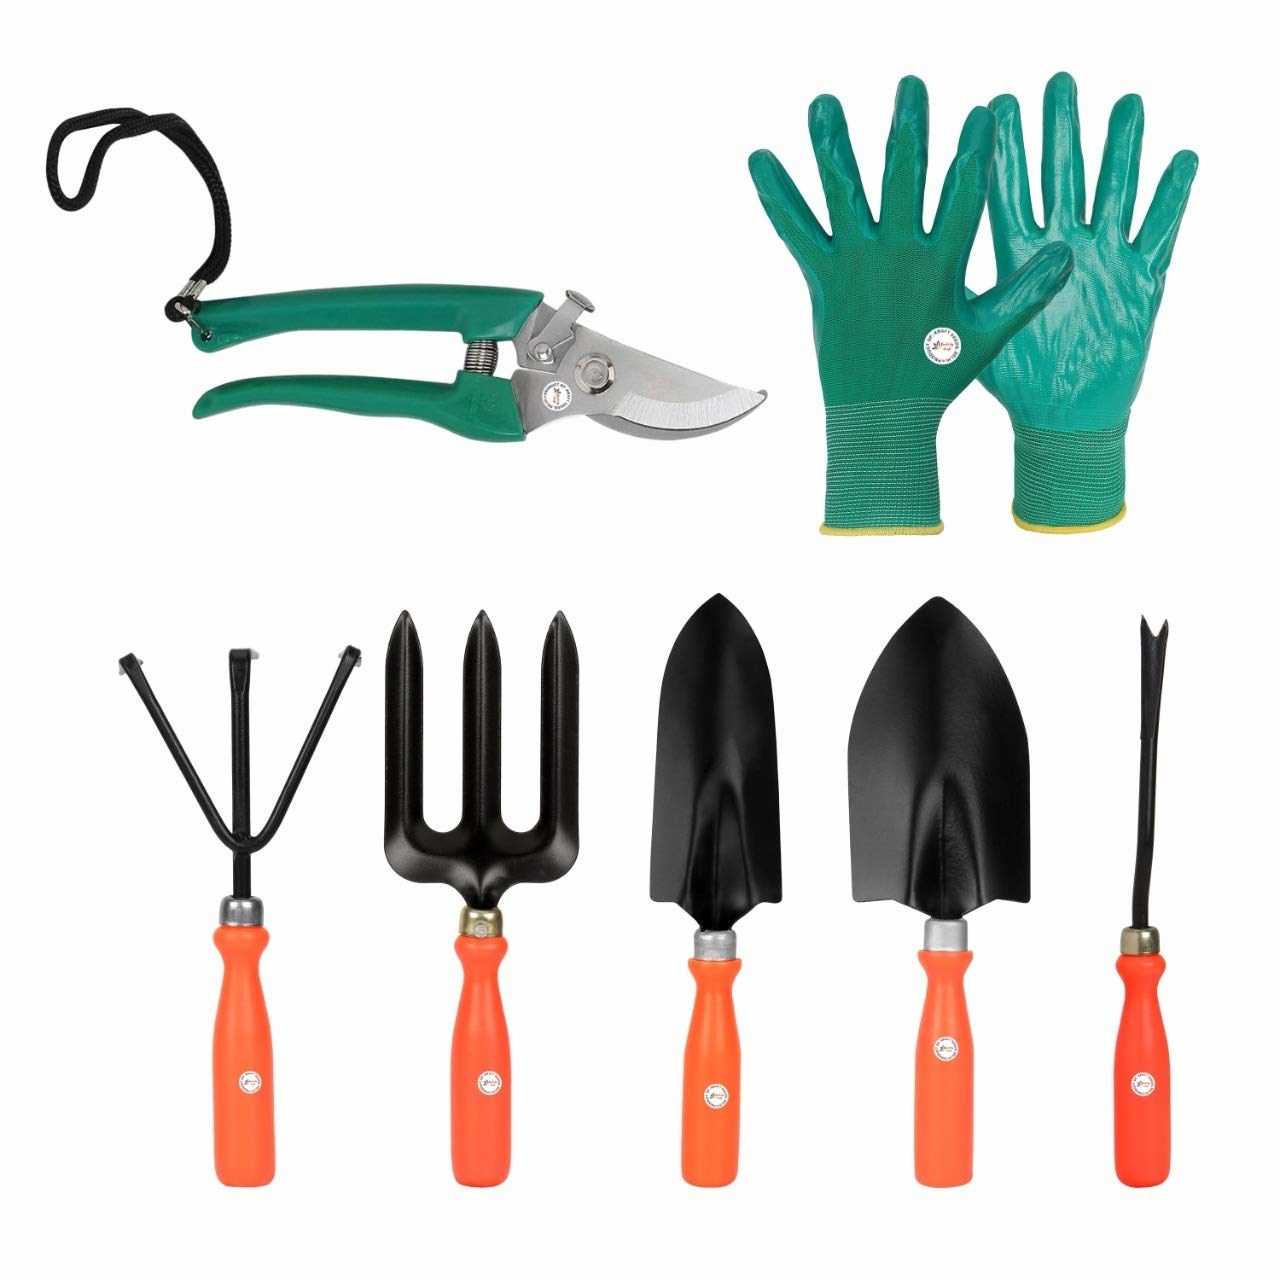 A tool kit with a gardening cut tool, gloves,  a fork, a cultivator, a narrow trowel, a large trowel and a weeder.